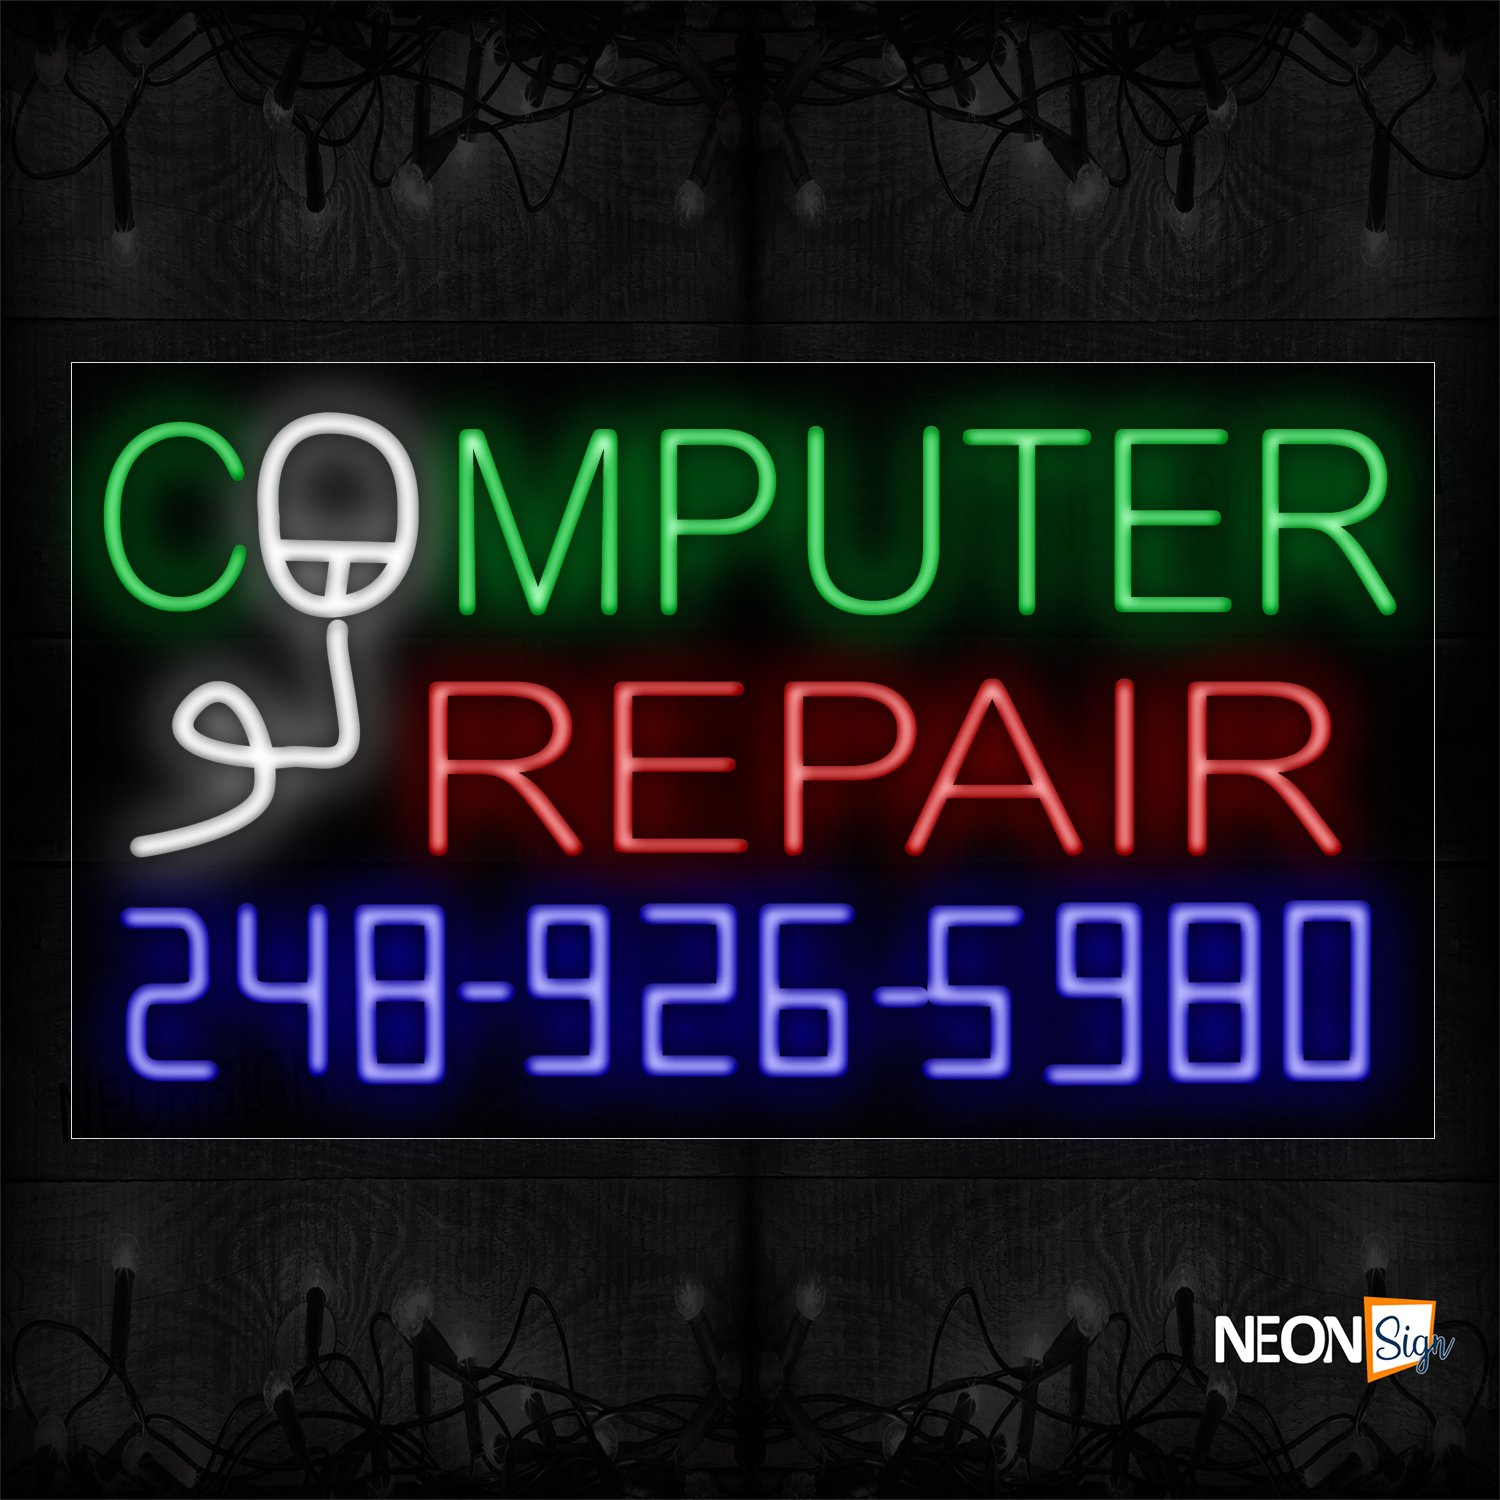 Image of 15061 Computer Repair With Contact No Neon Signs_20x37 Black Backing